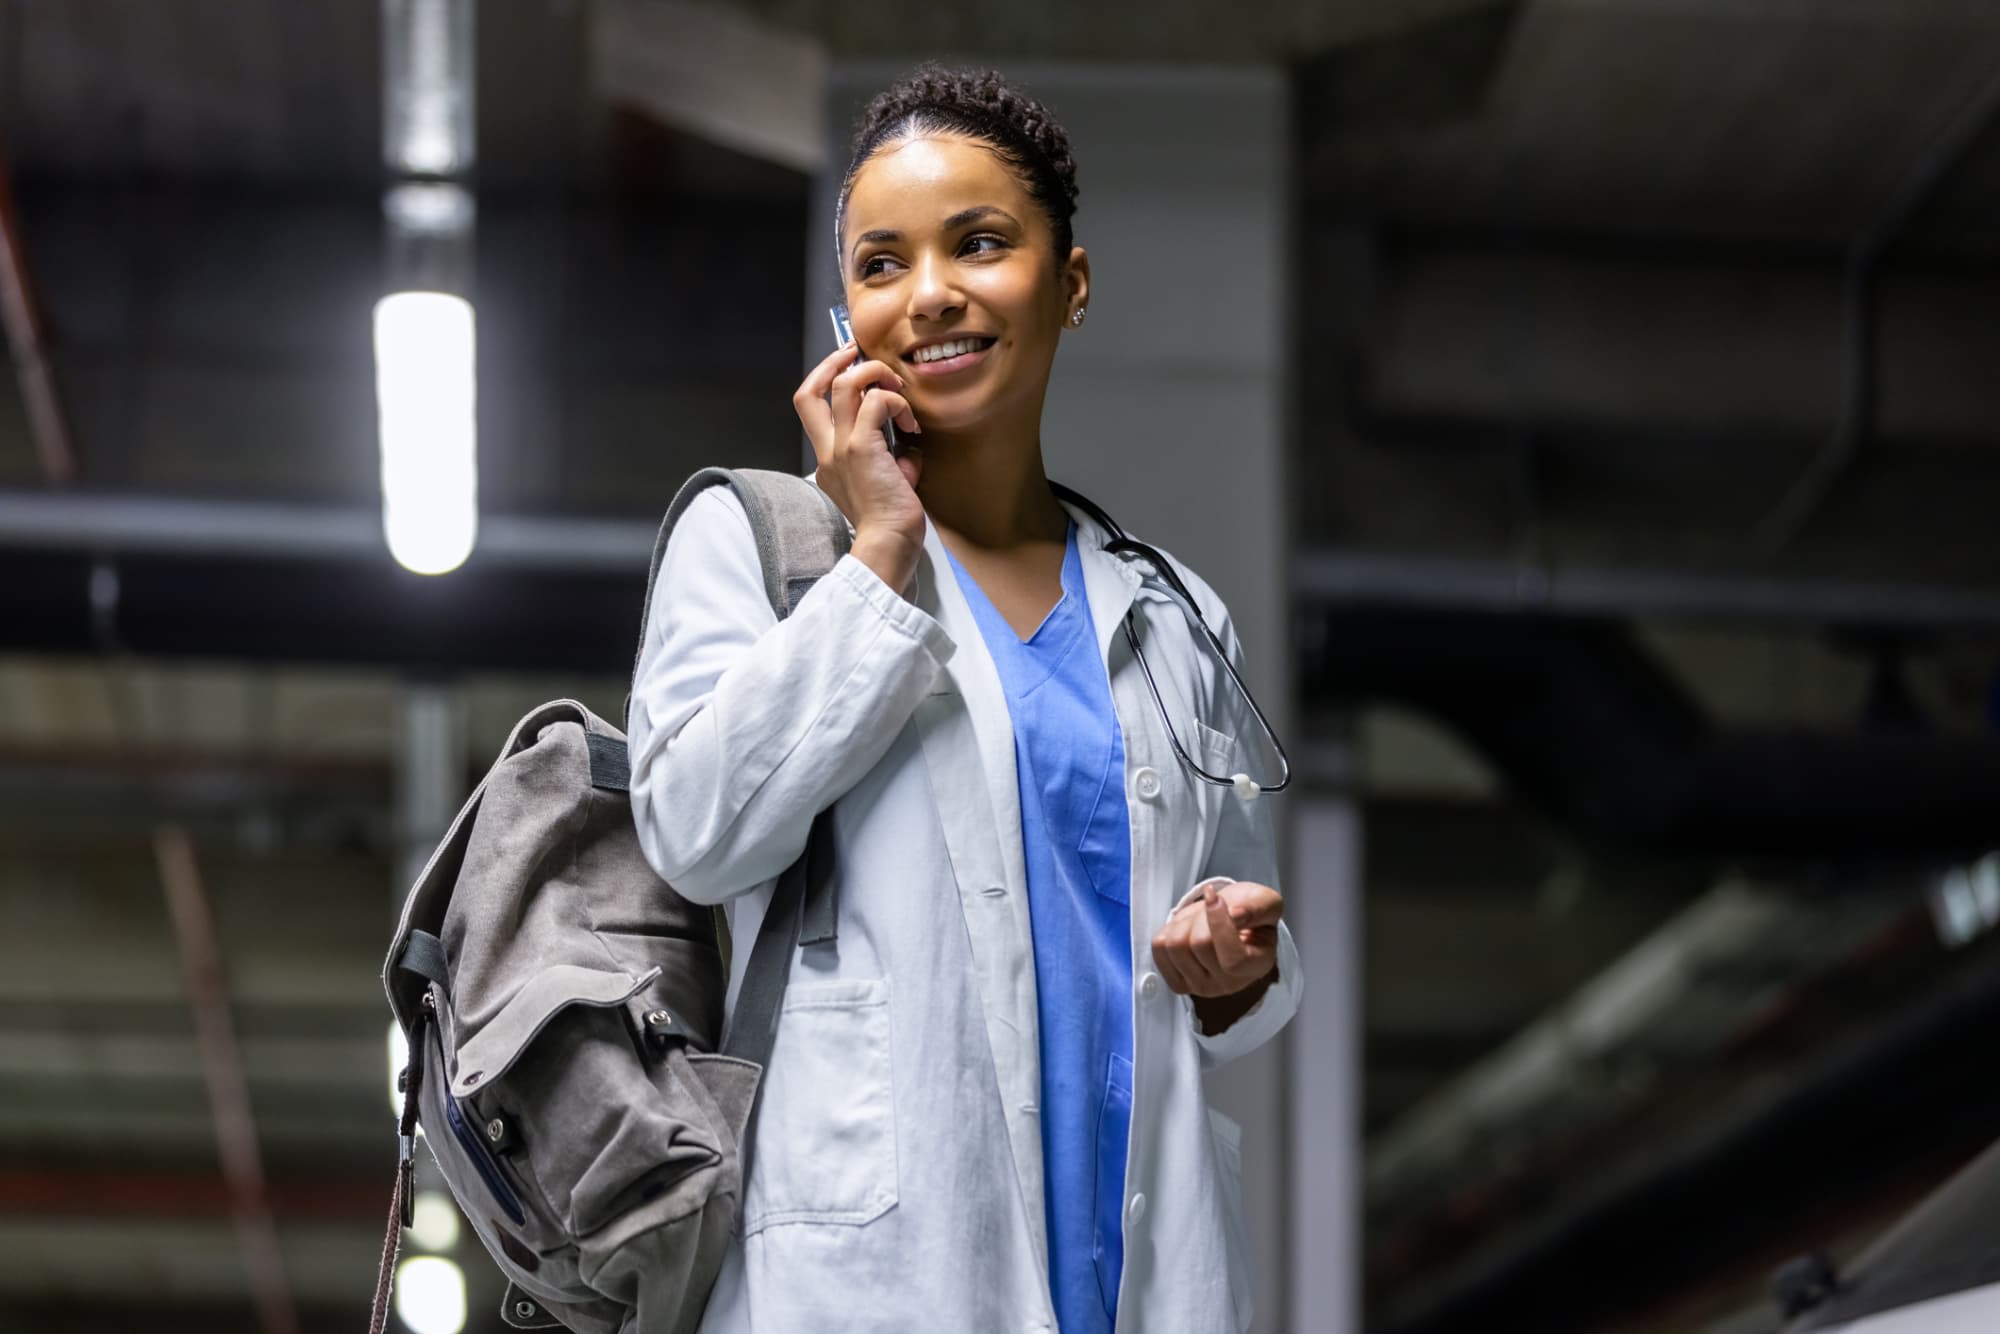 Medical professional talking on a cell phone in a parking garage